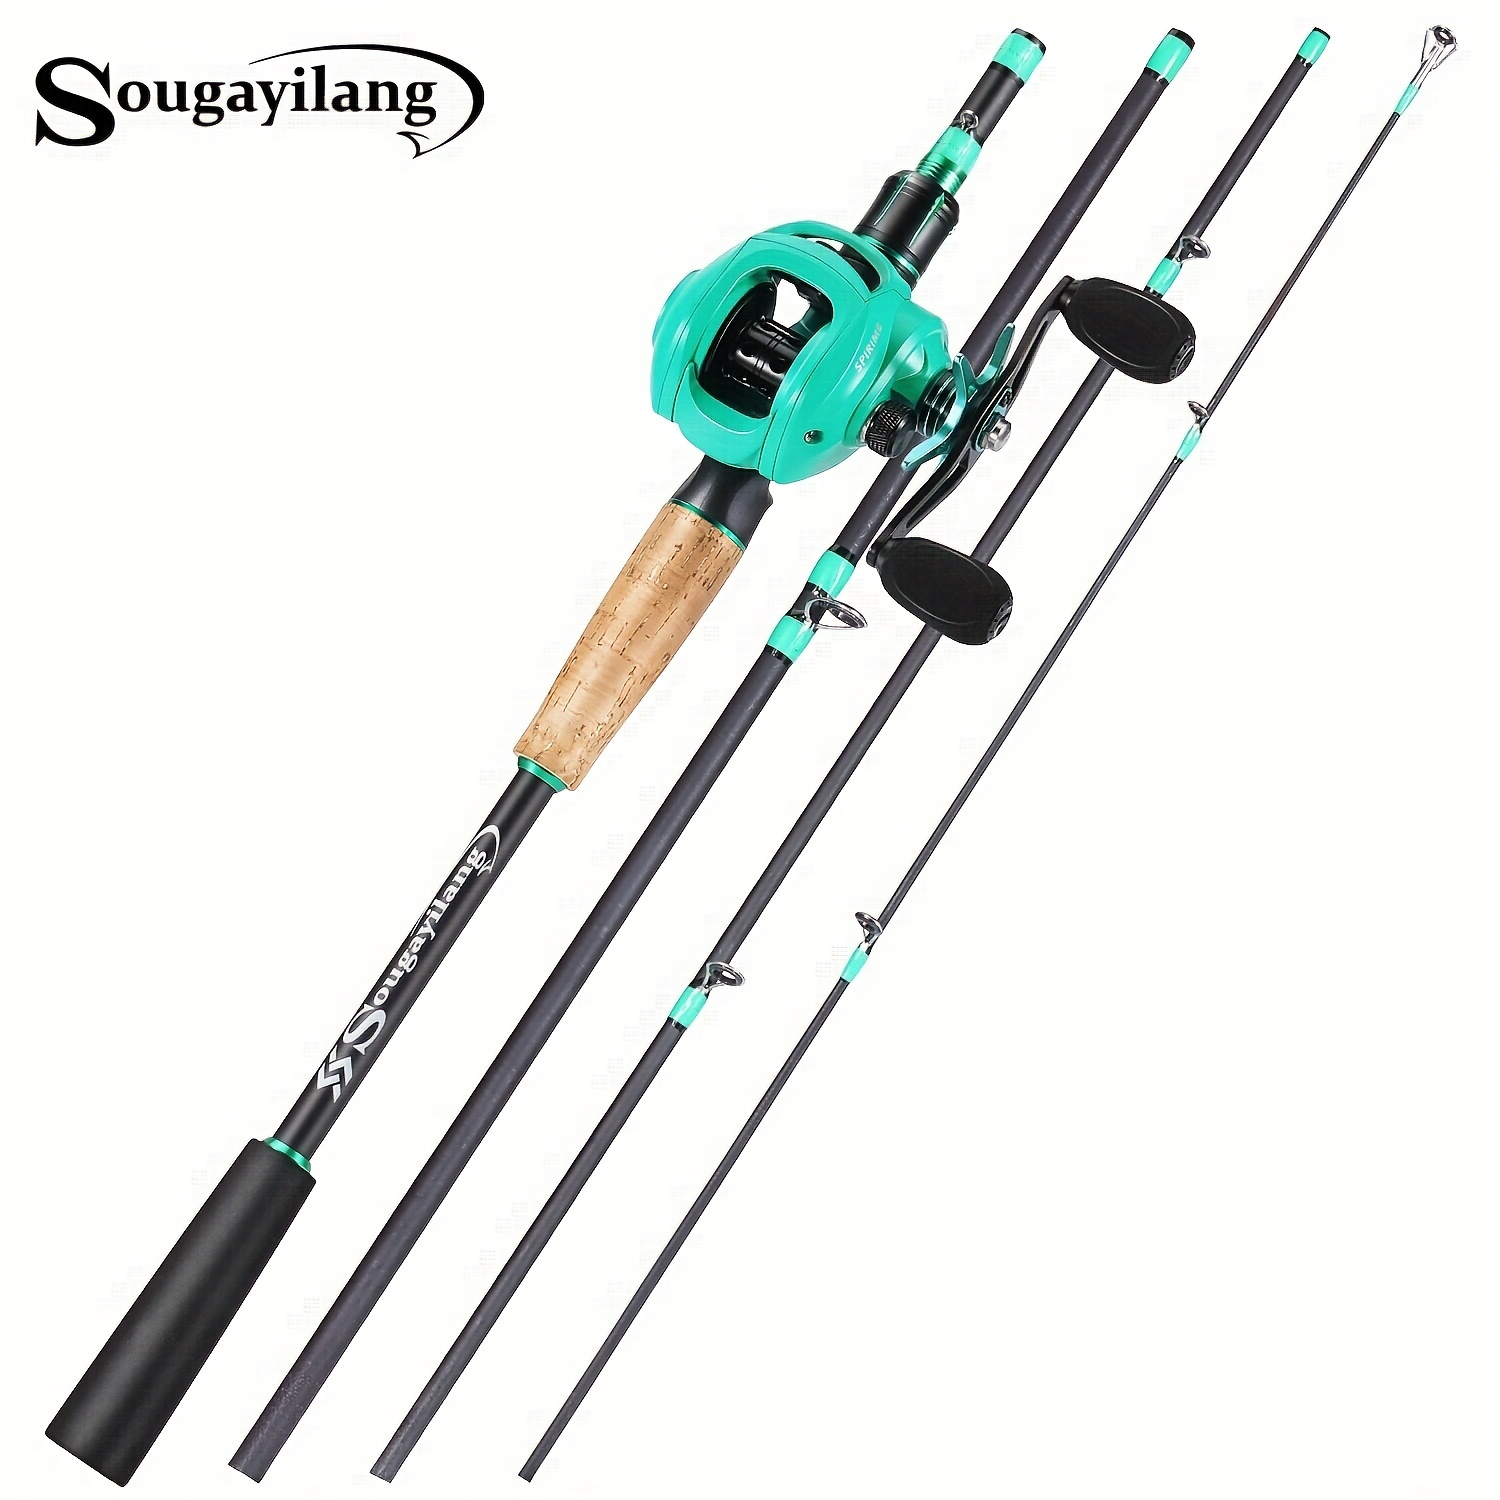 Sougayilang Portable Baitcasting Fishing Rod and Reel Combo - Carbon Pole  with 9+1 BB Ultra Light Baitcasting Reel for Travel, Saltwater, Freshwater